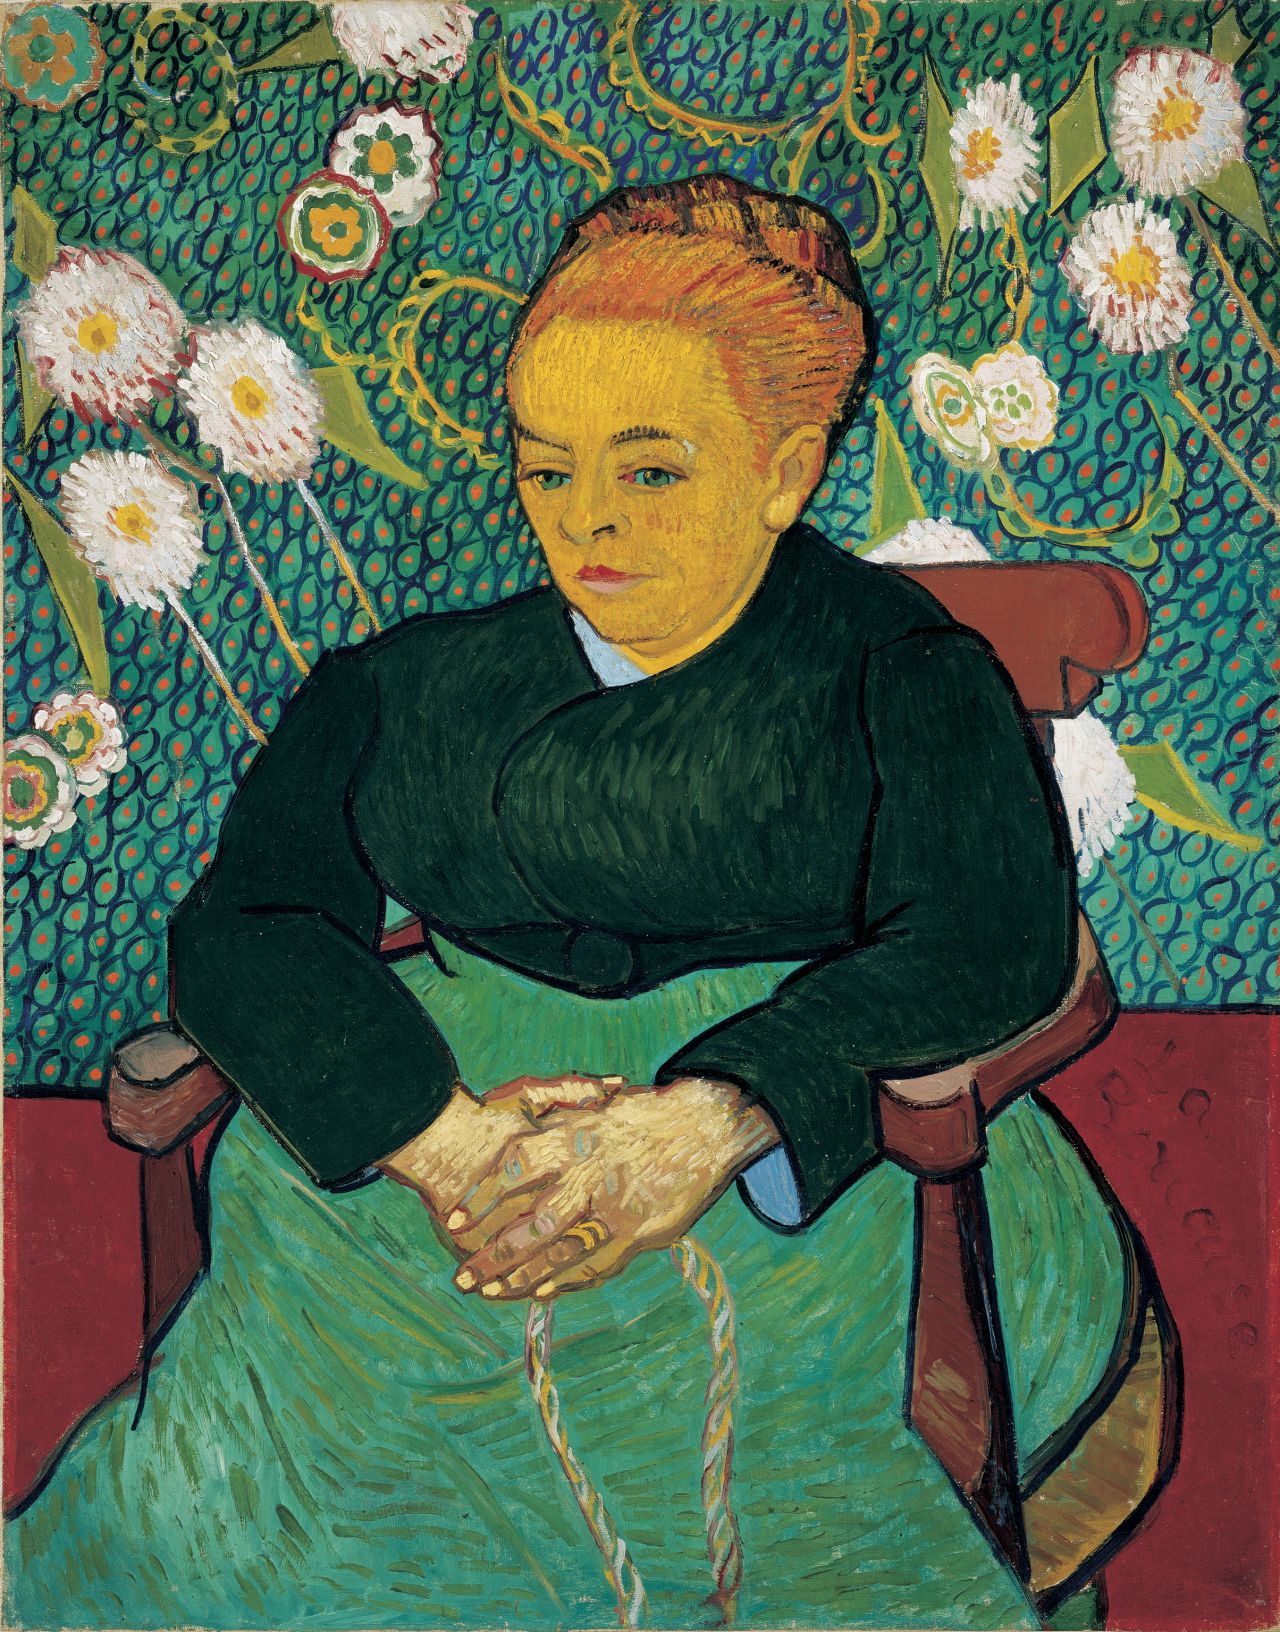 Van Gogh incorporated many elements of Japanese art into his work, including strong outlines, bold colors and the absence of shadows, as seen in "Woman Rocking the Cradle (Augustine Roulin)" (1889). 